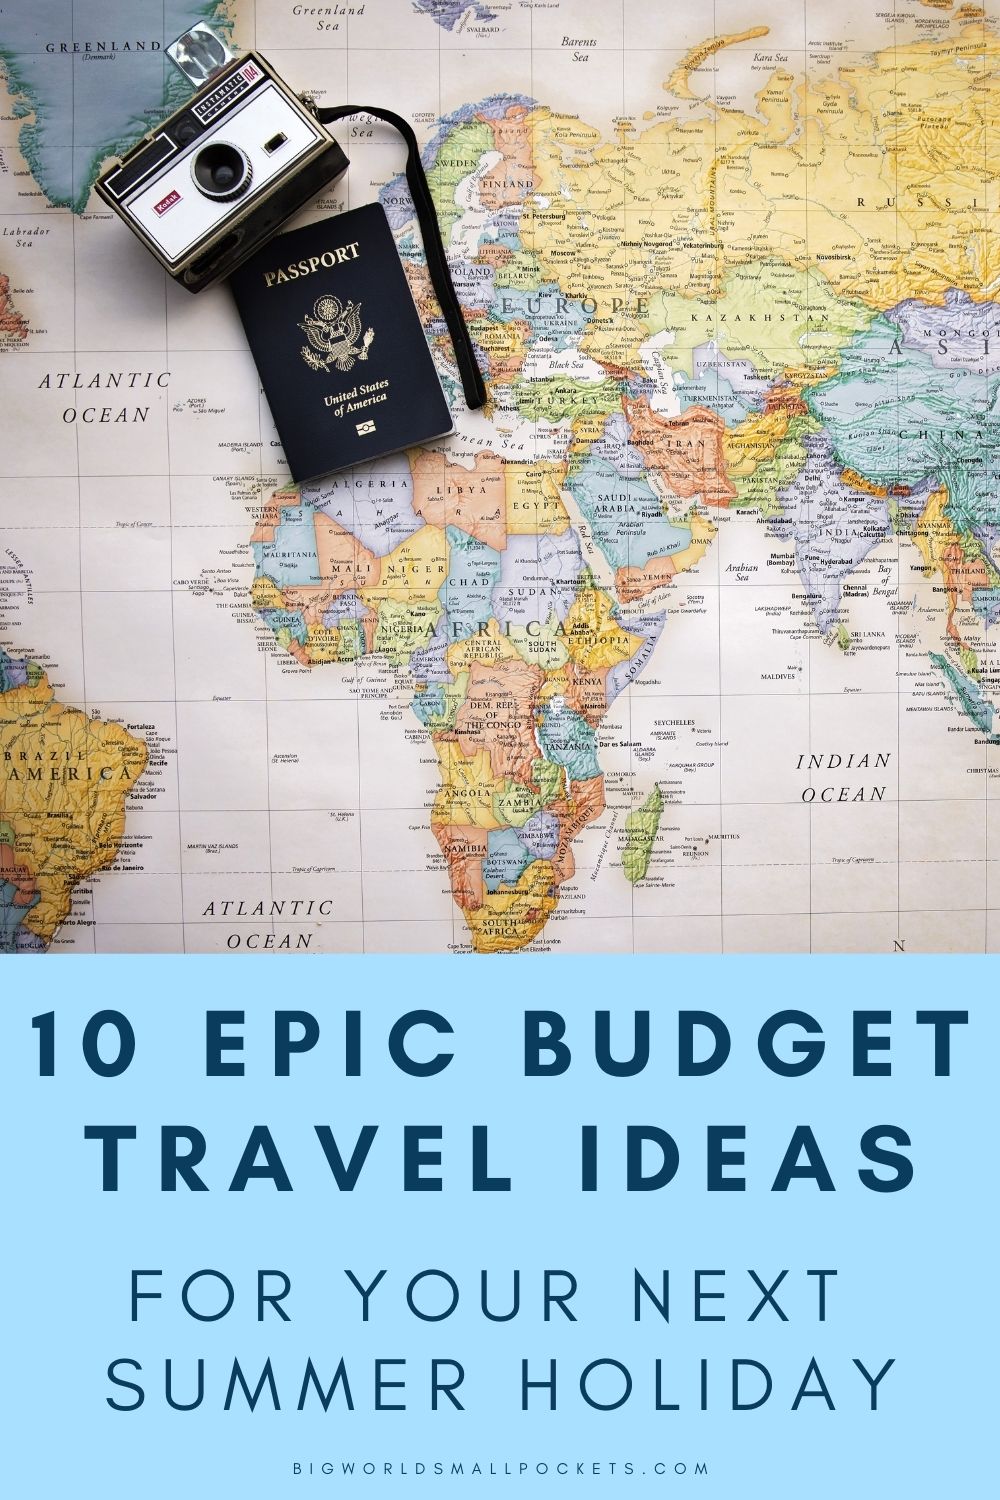 10 Epic Budget Travel ideas for Your Next Summer Holiday